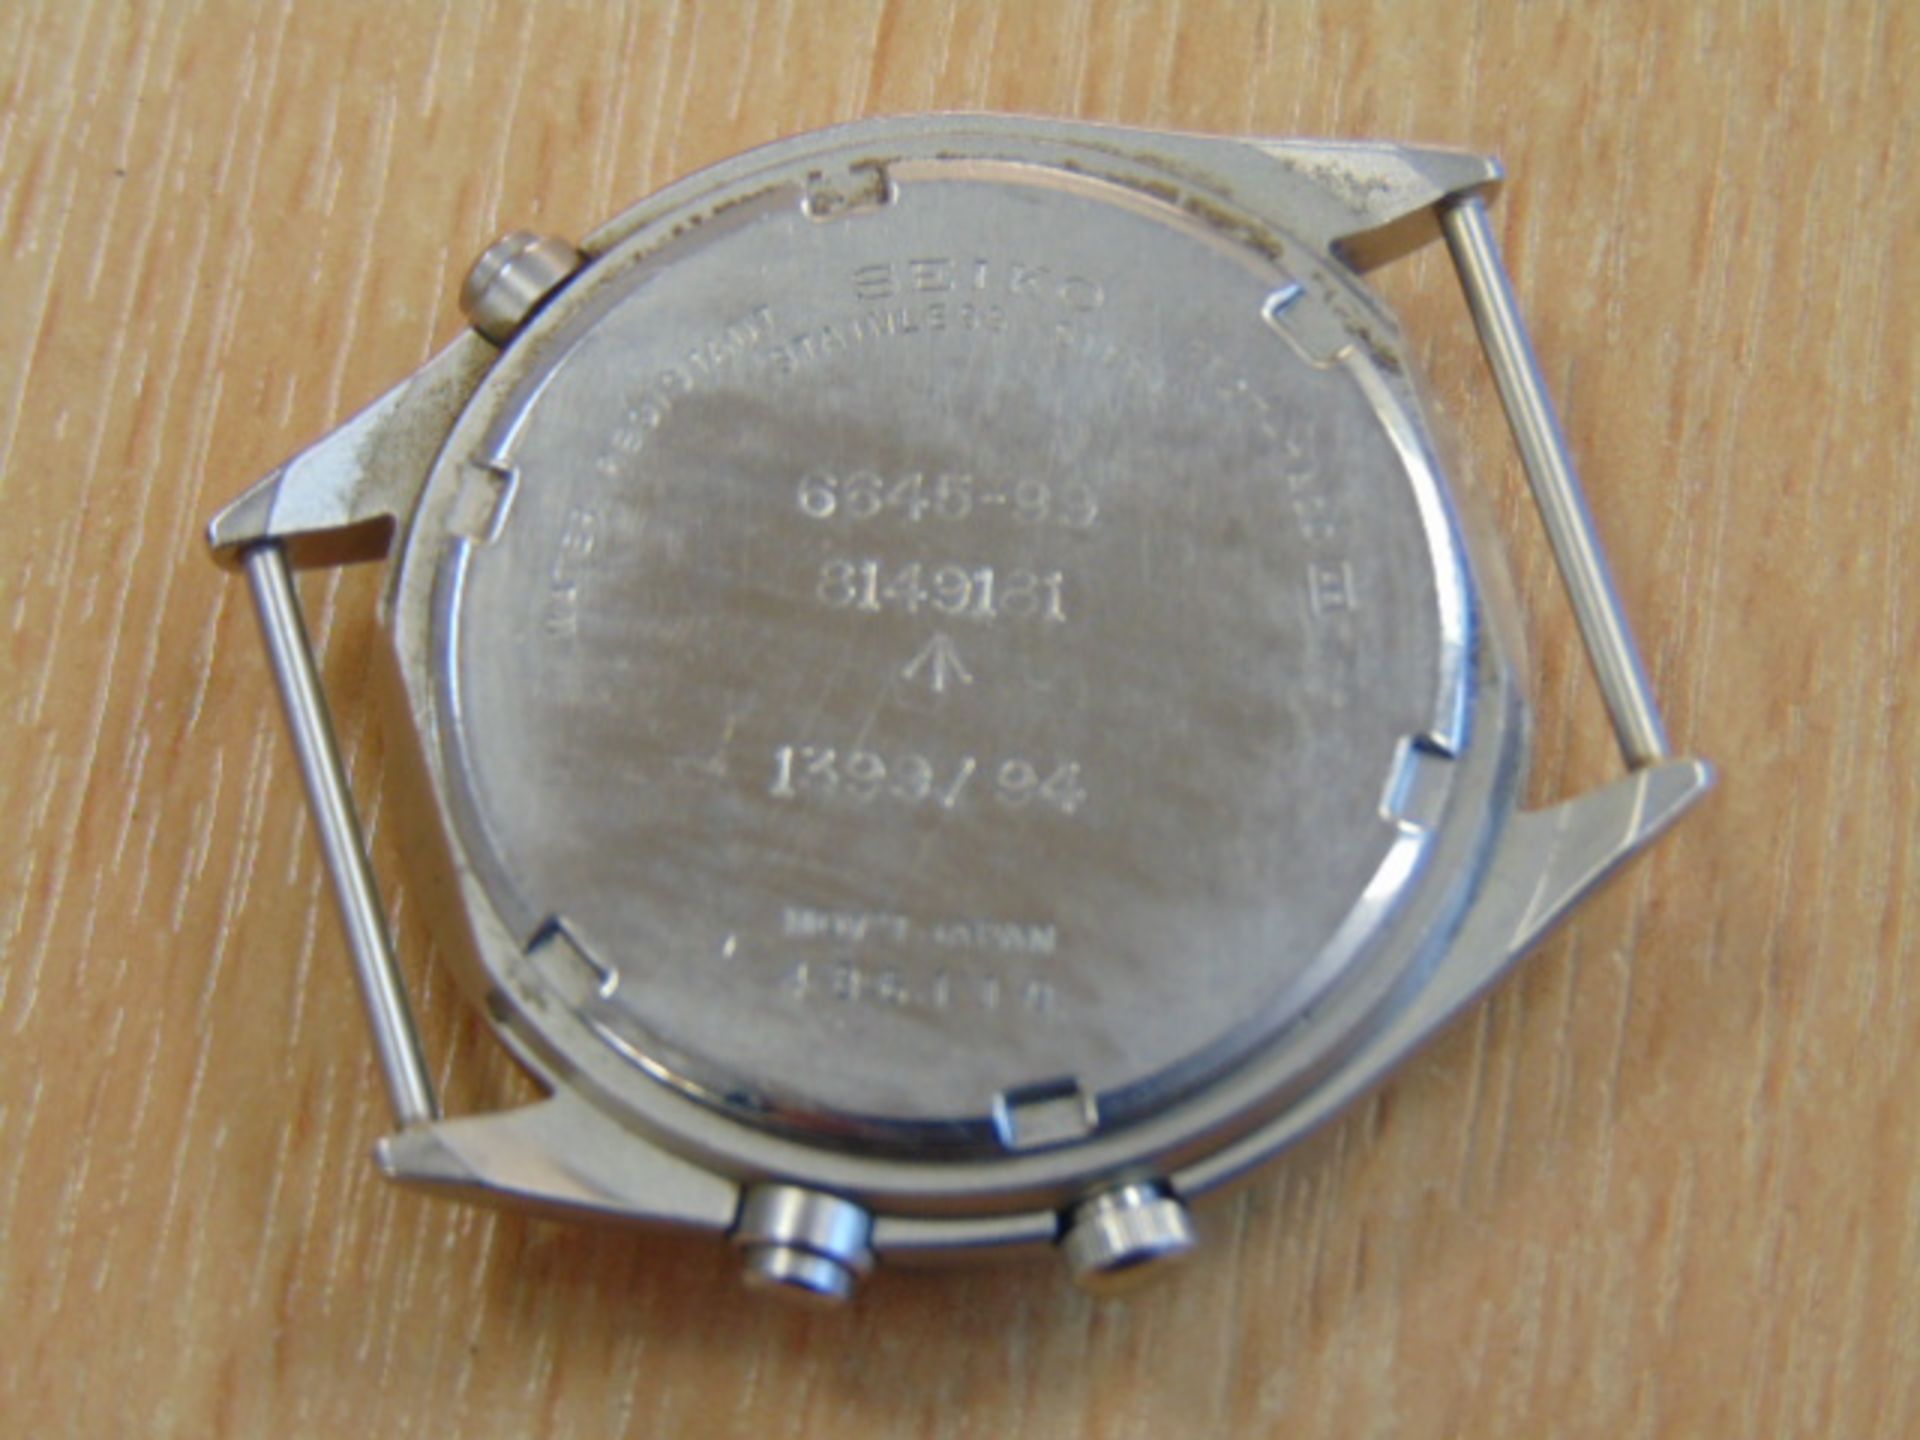 SEIKO GEN 2 PILOTS CHRONO RAF ISSUE NATO MARKED DATED 1994 - Image 5 of 6